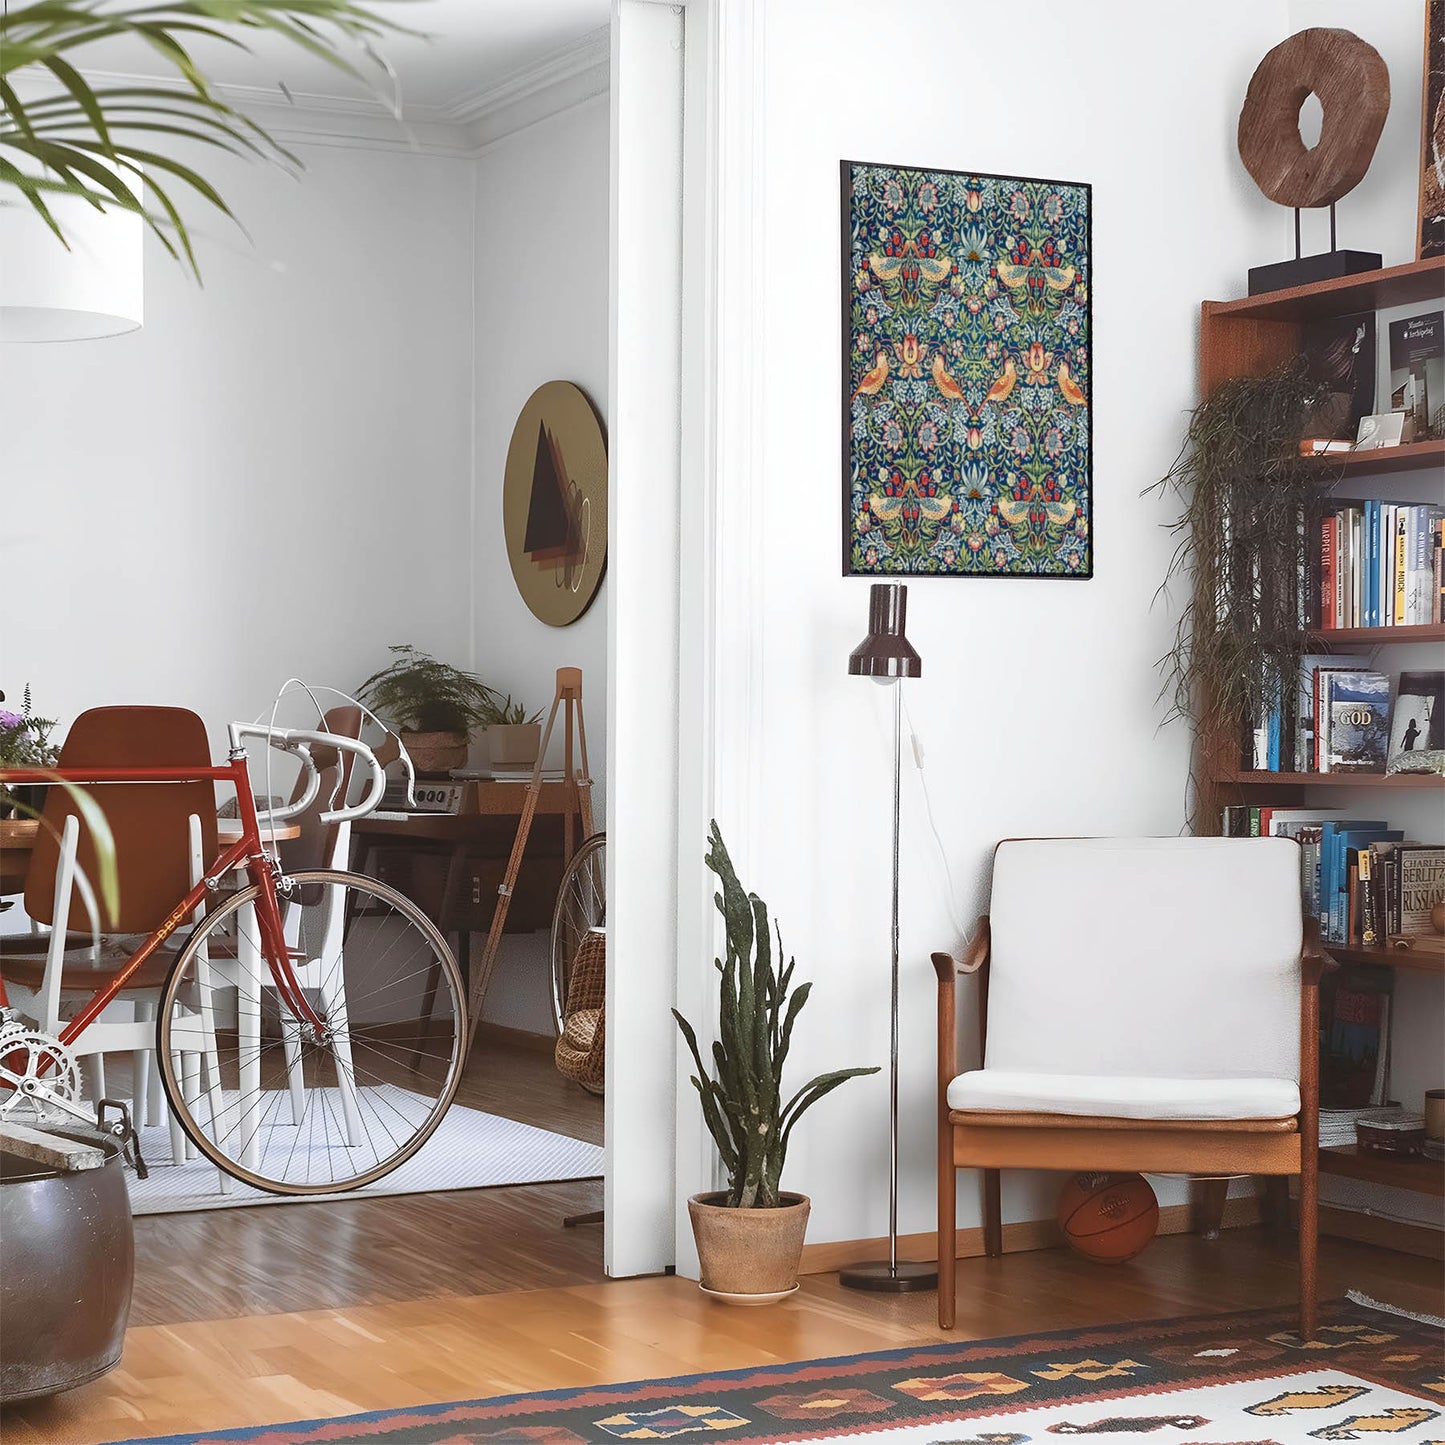 Eclectic living room with a road bike, bookshelf and house plants that features framed artwork of a Colorful Birds and Garden above a chair and lamp